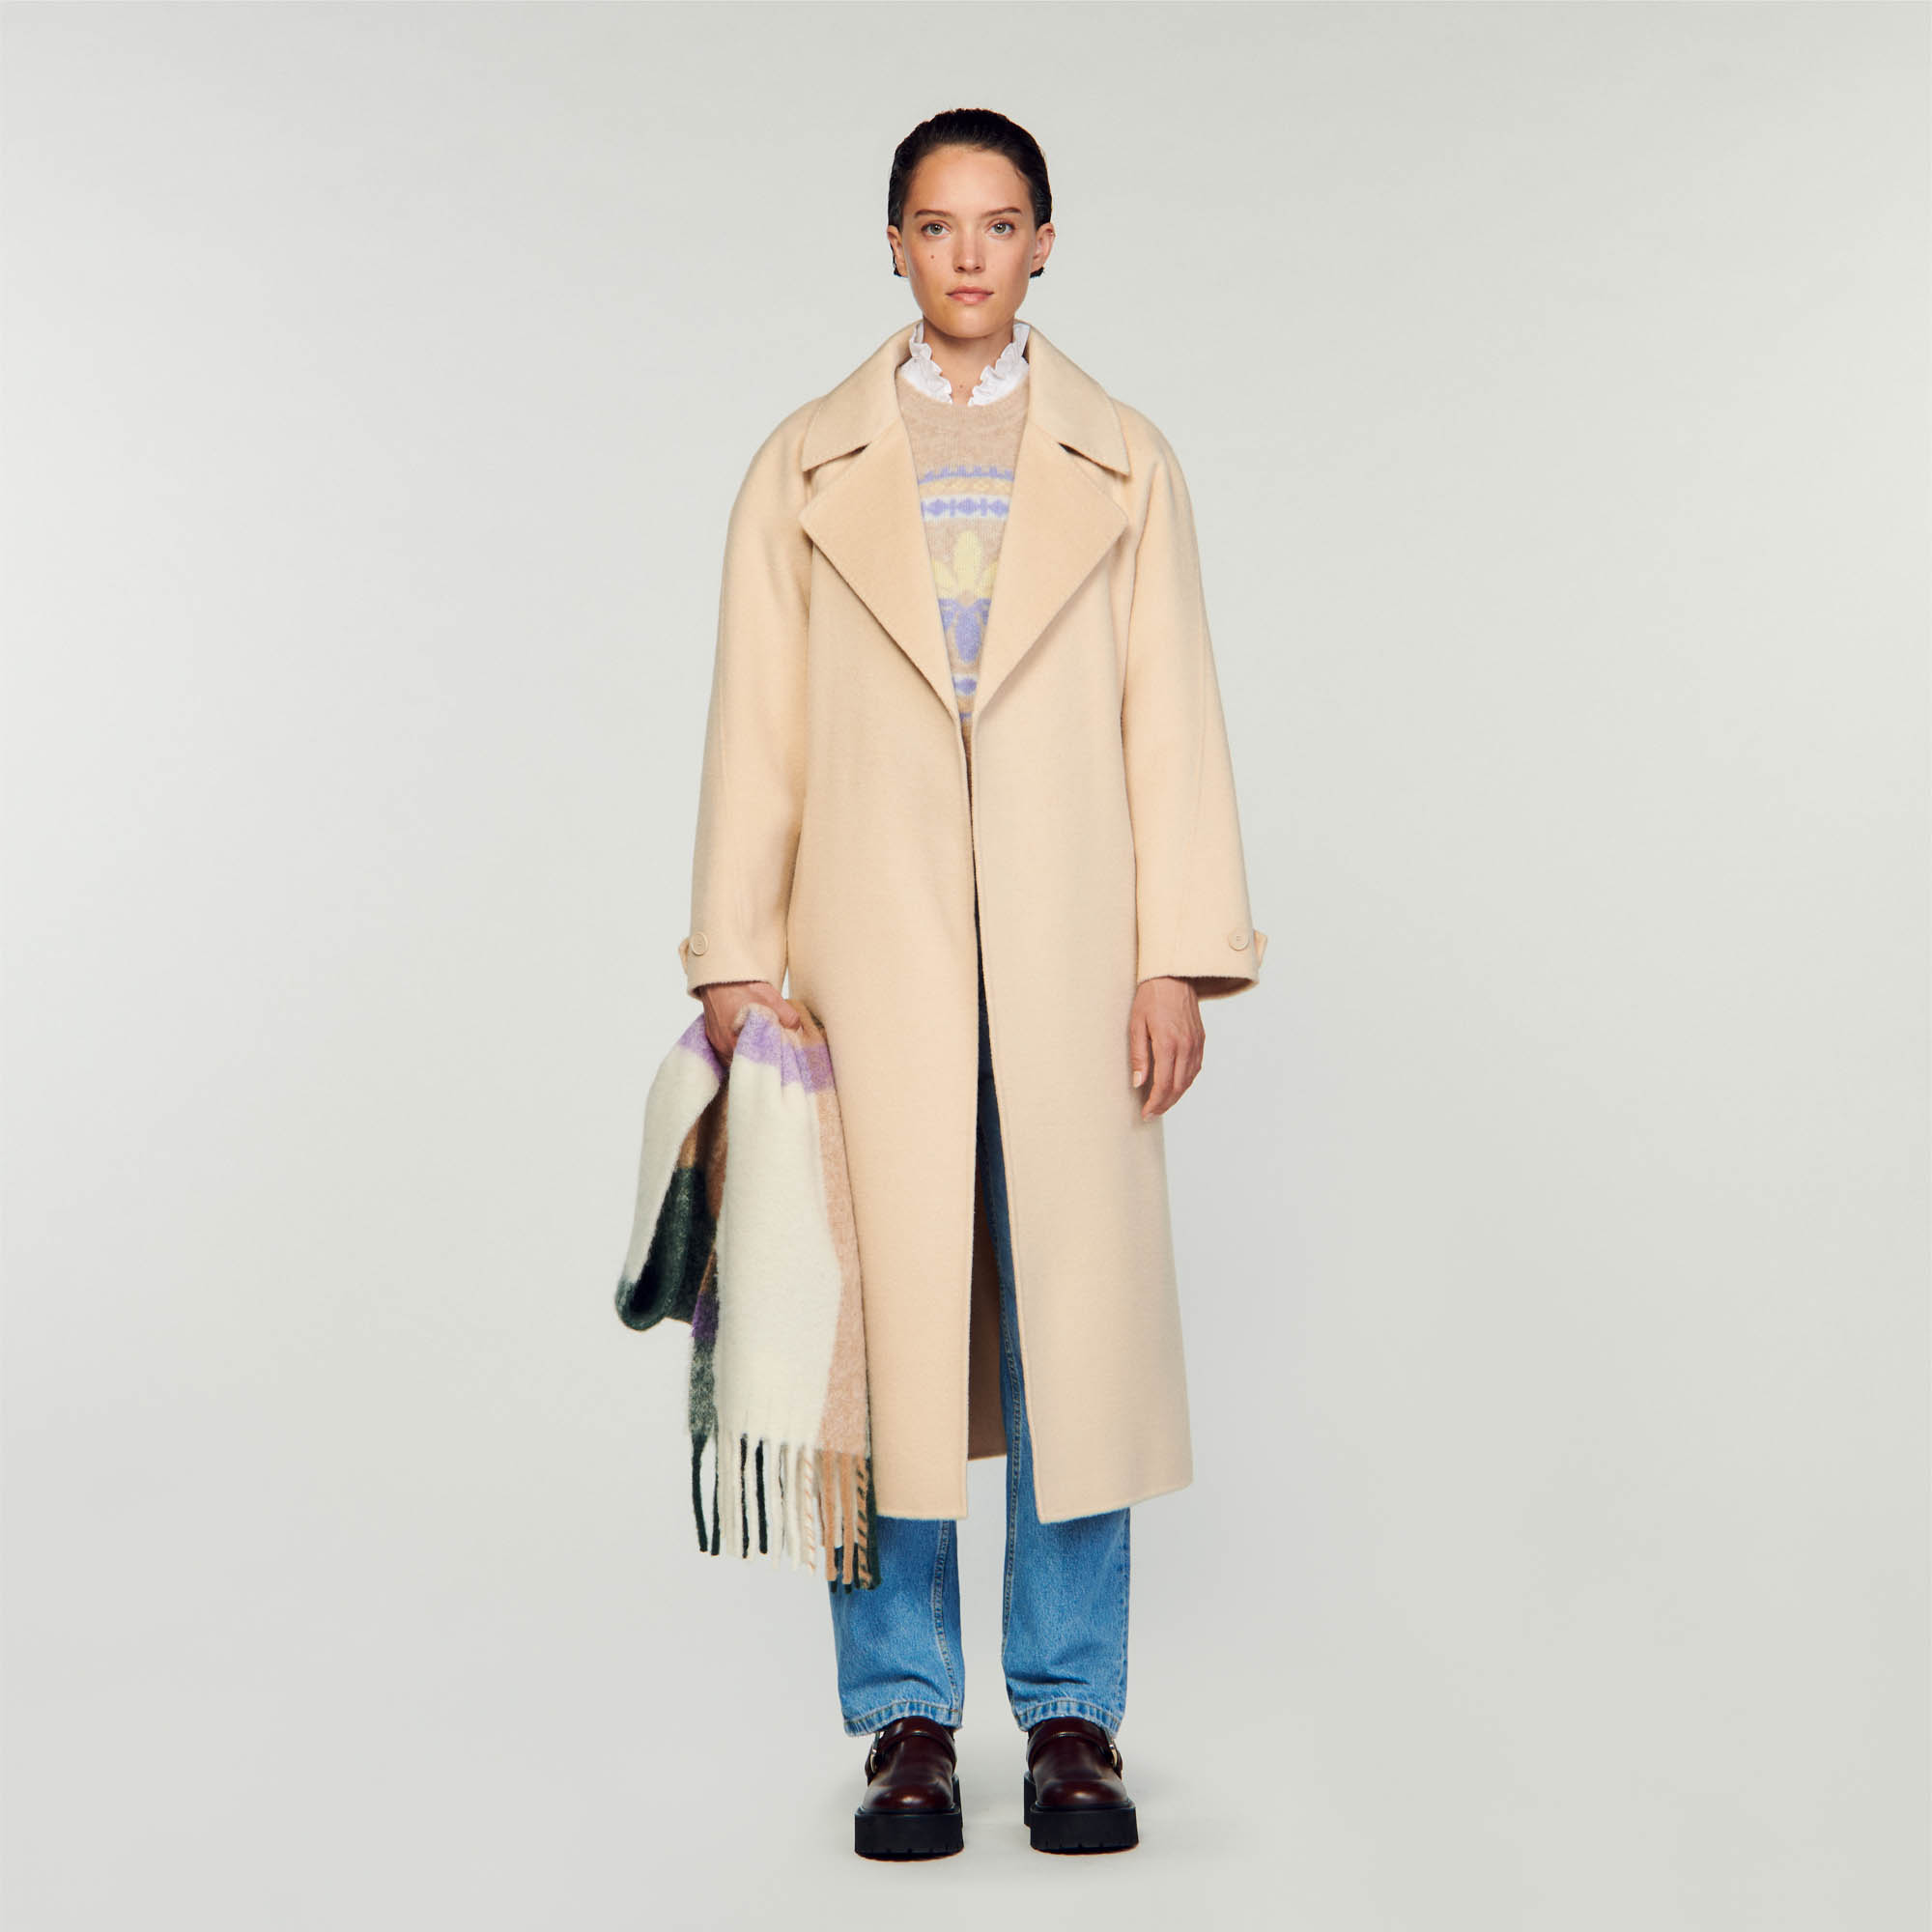 Sandro wool Lining: Long double-breasted wool trench coat with oversized collar, long sleeves with buttoned plackets on the cuffs and a removable tie belt on the waist